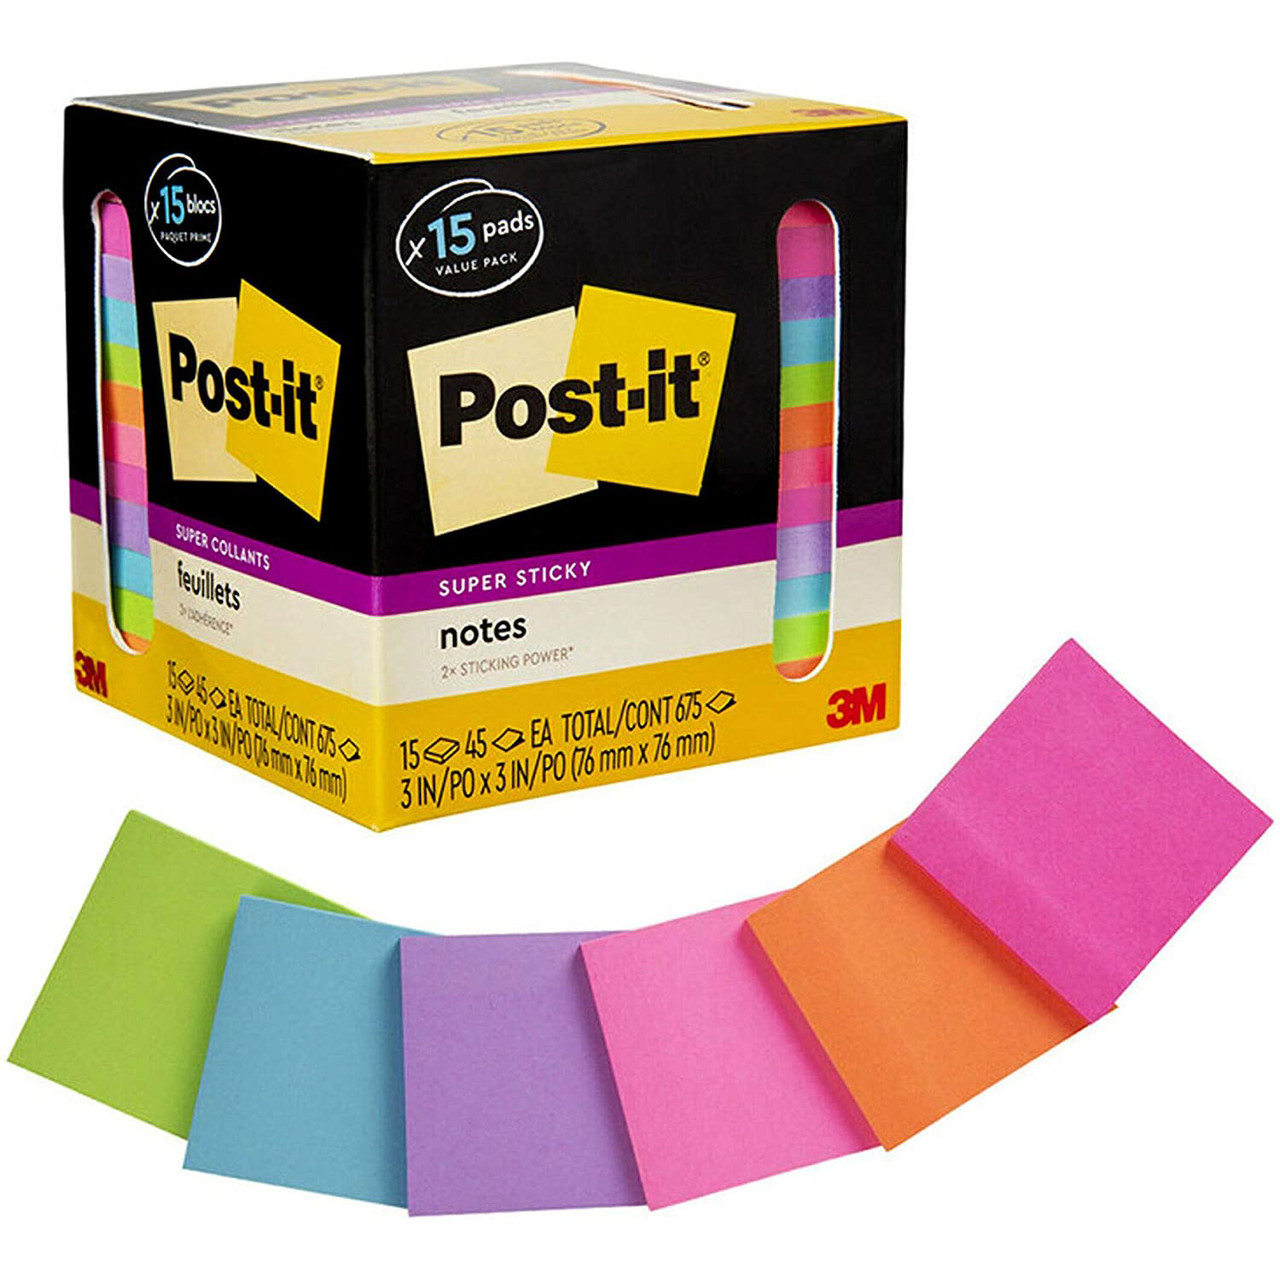 Post-it Super Sticky Notes 654-15SSCP, Assorted Bright Colors, 3 x